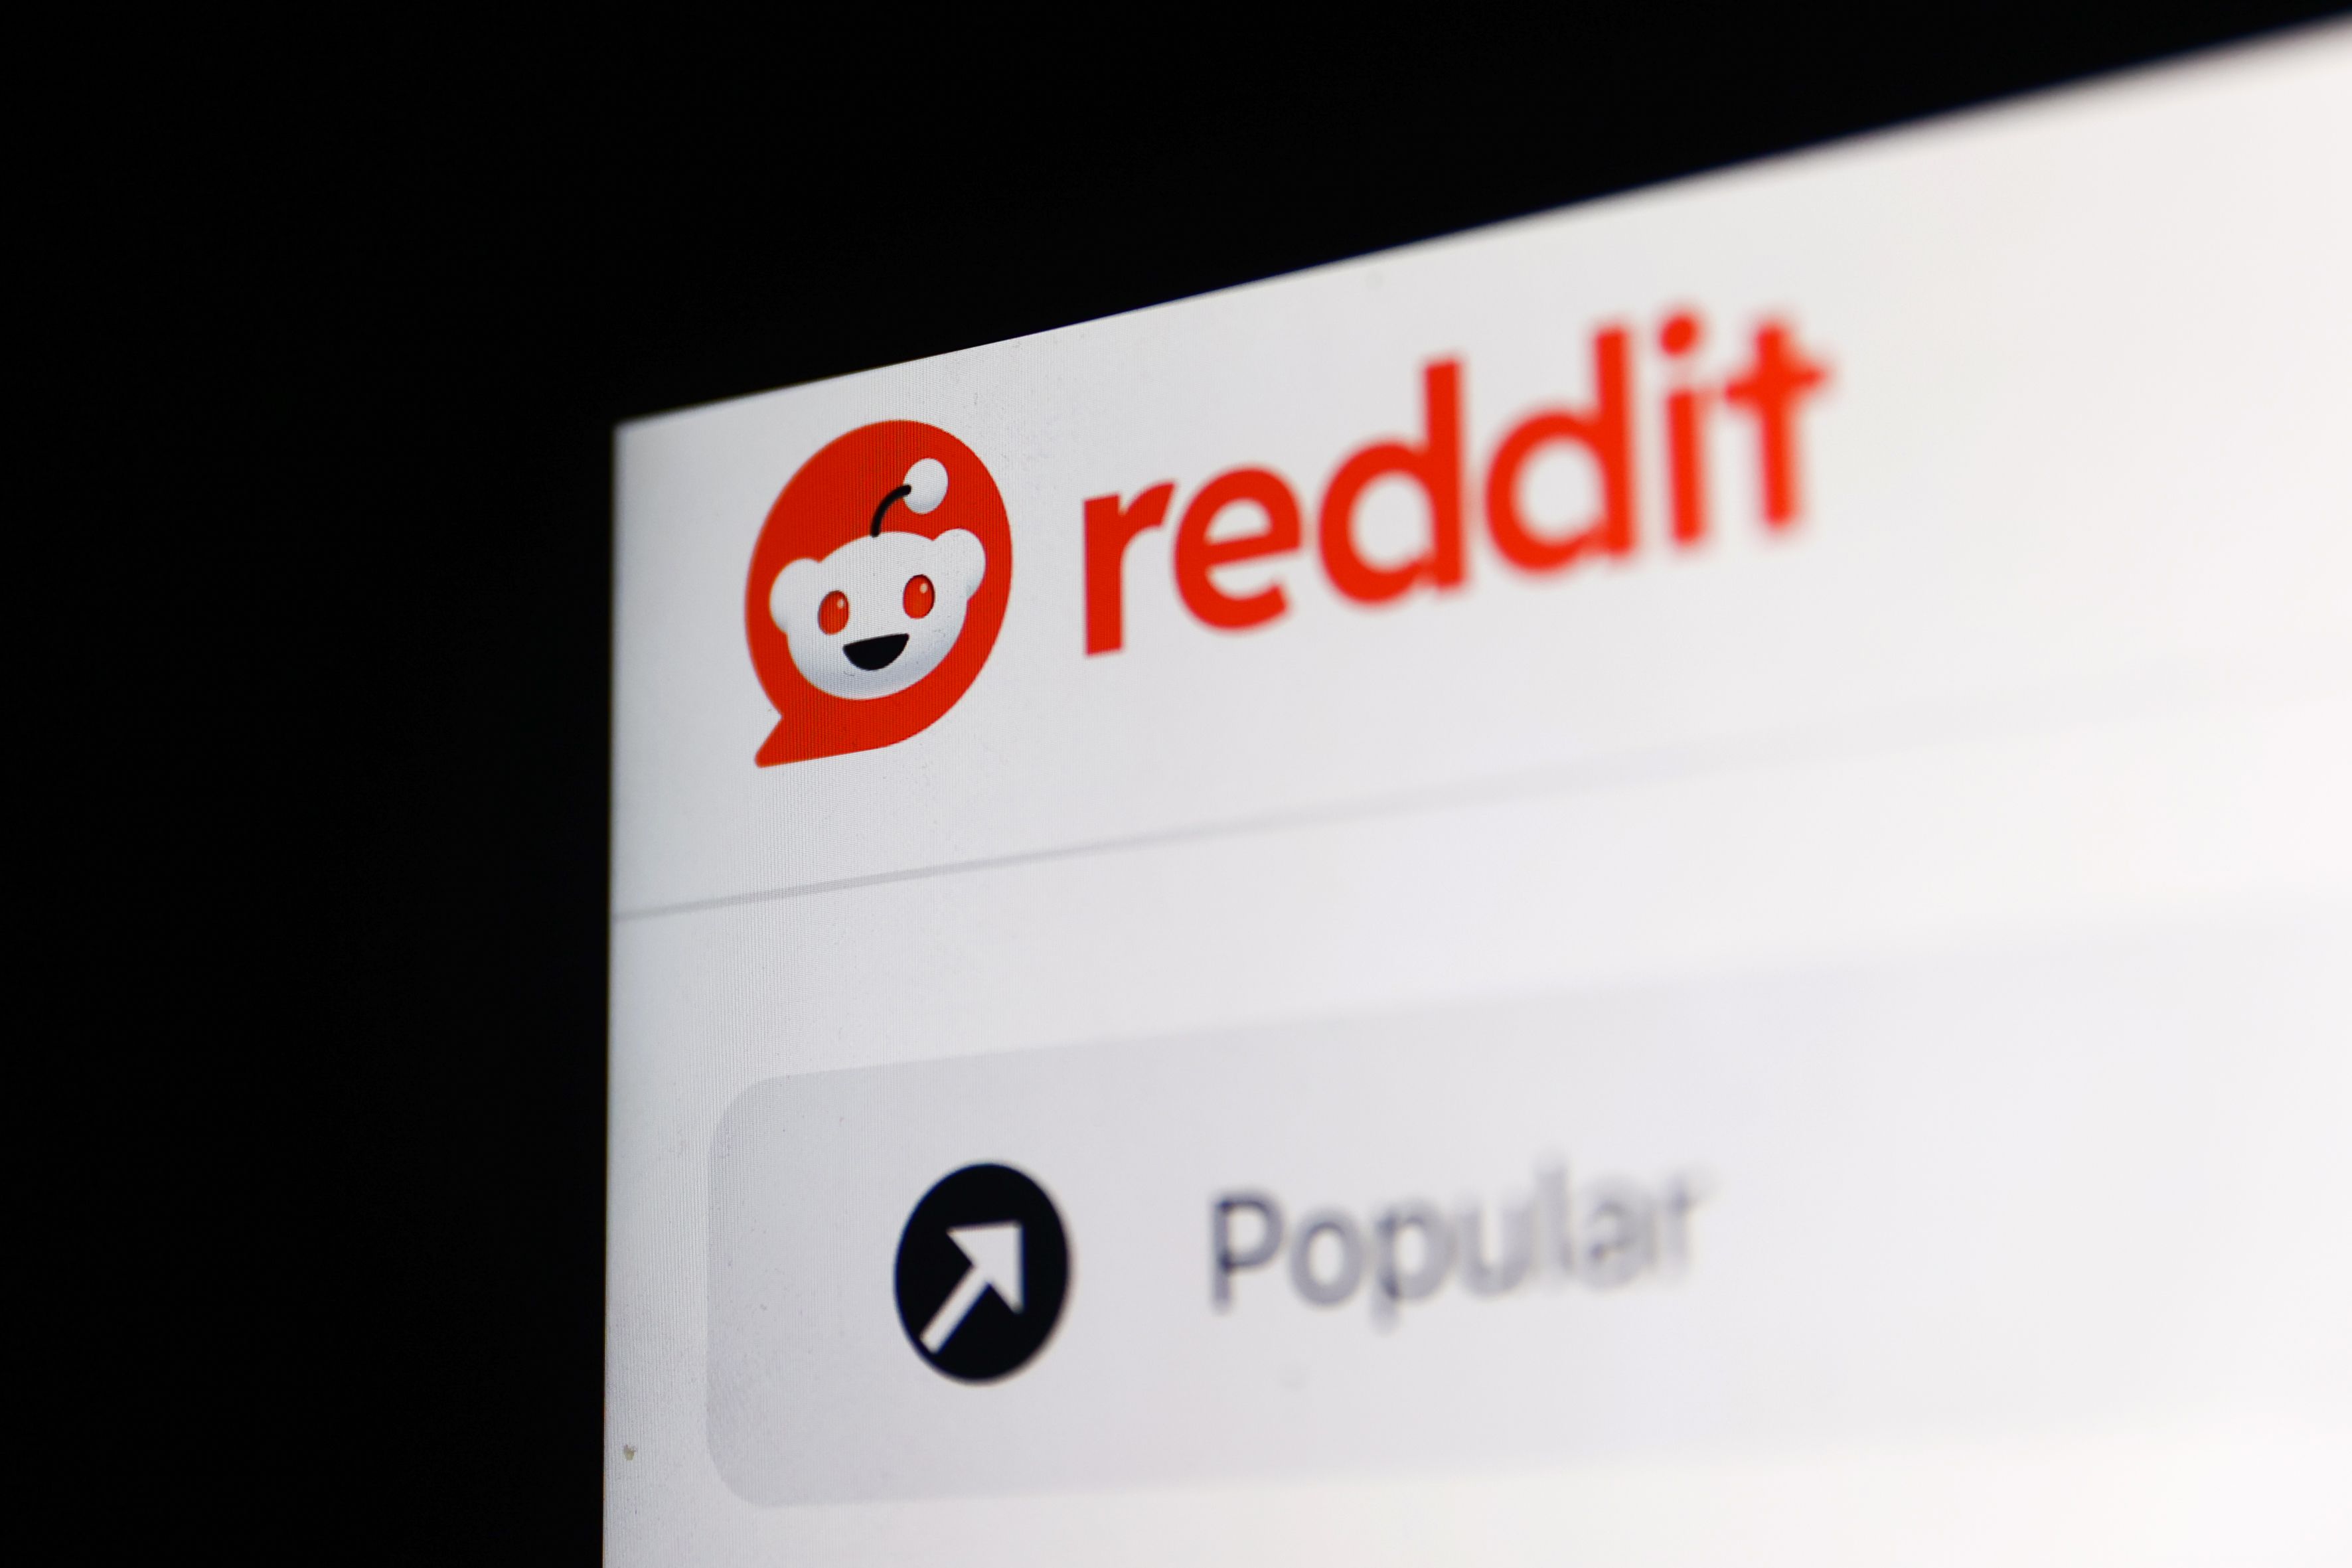 Reddit’s Going Public — Should You Buy Right Away or Wait To Invest?